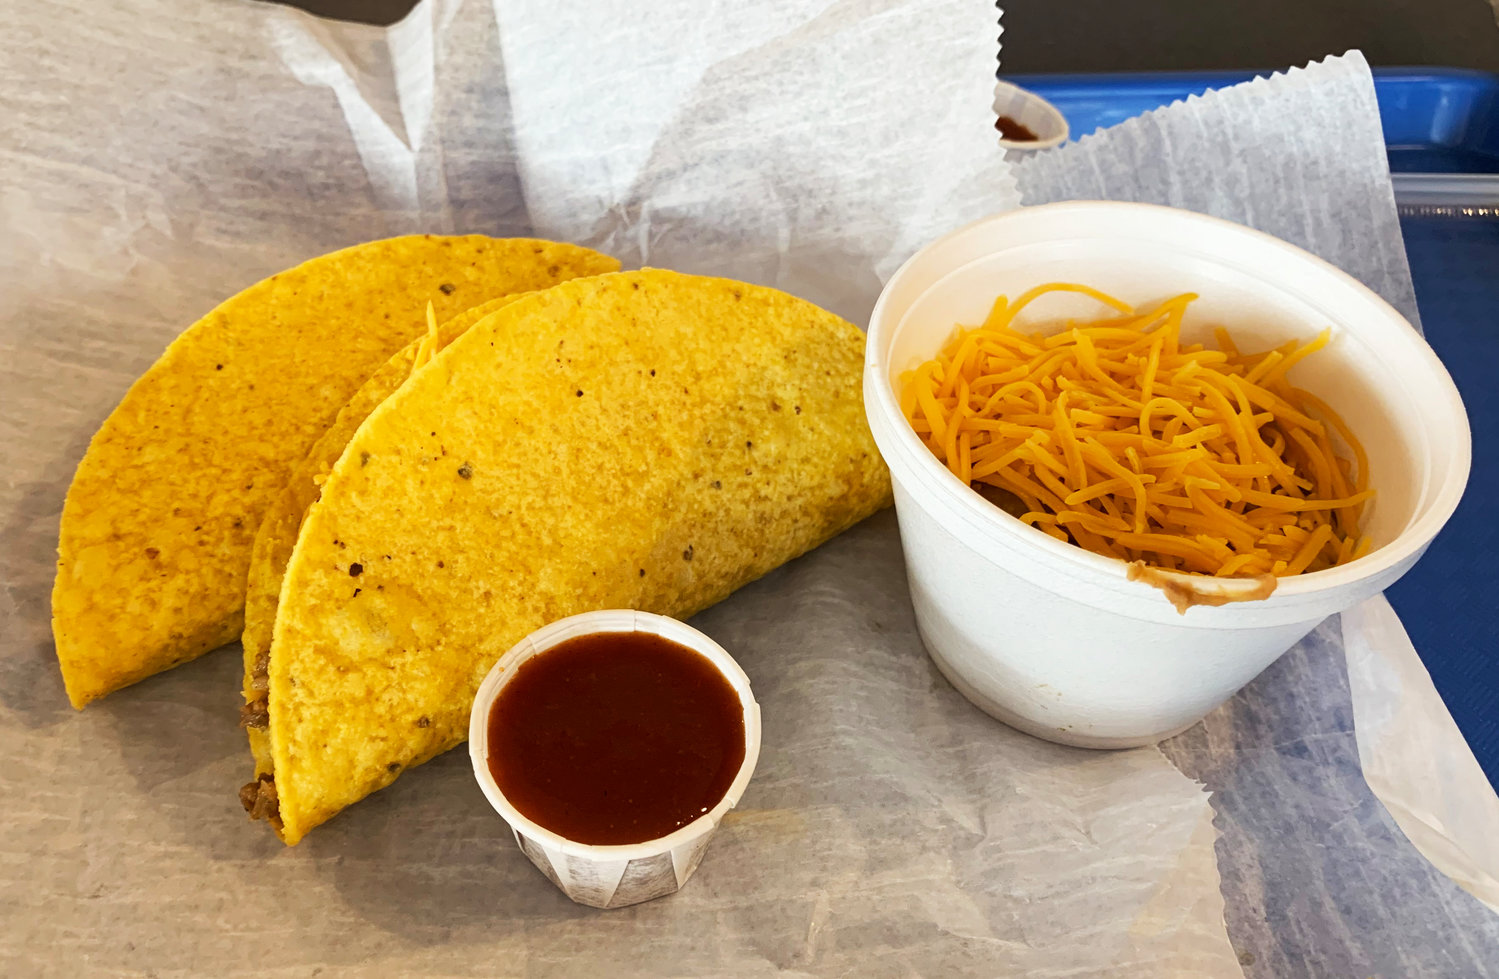 Two hard shell tacos with a side of beans from Mr. Taco.